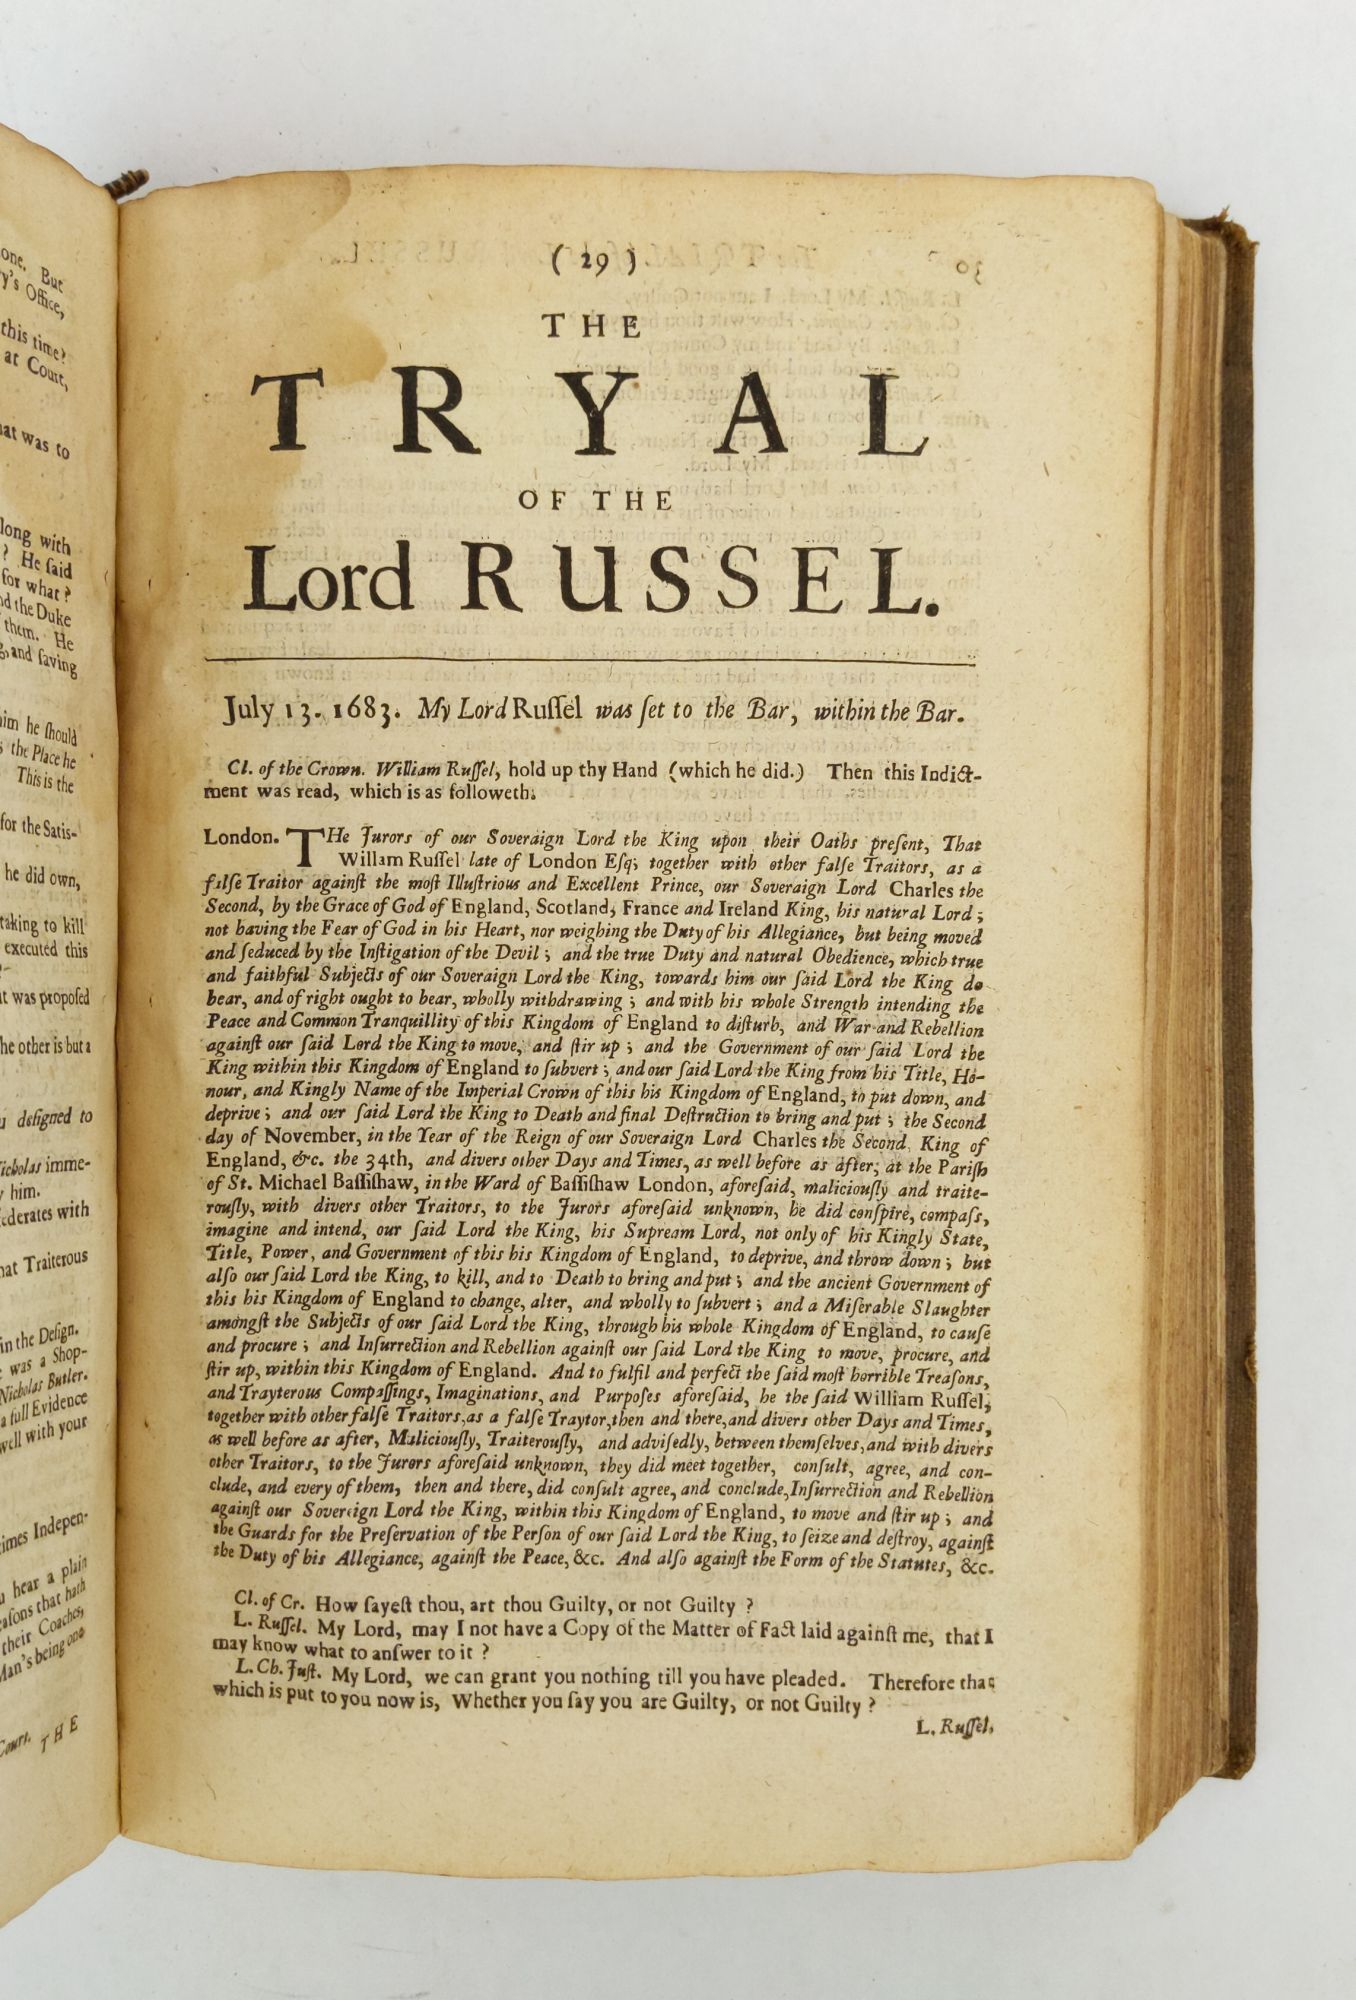 Product Image for [BOUND COLLECTION OF REPORTS FROM TEN SEVENTEENTH CENTURY ENGLISH TRIALS]